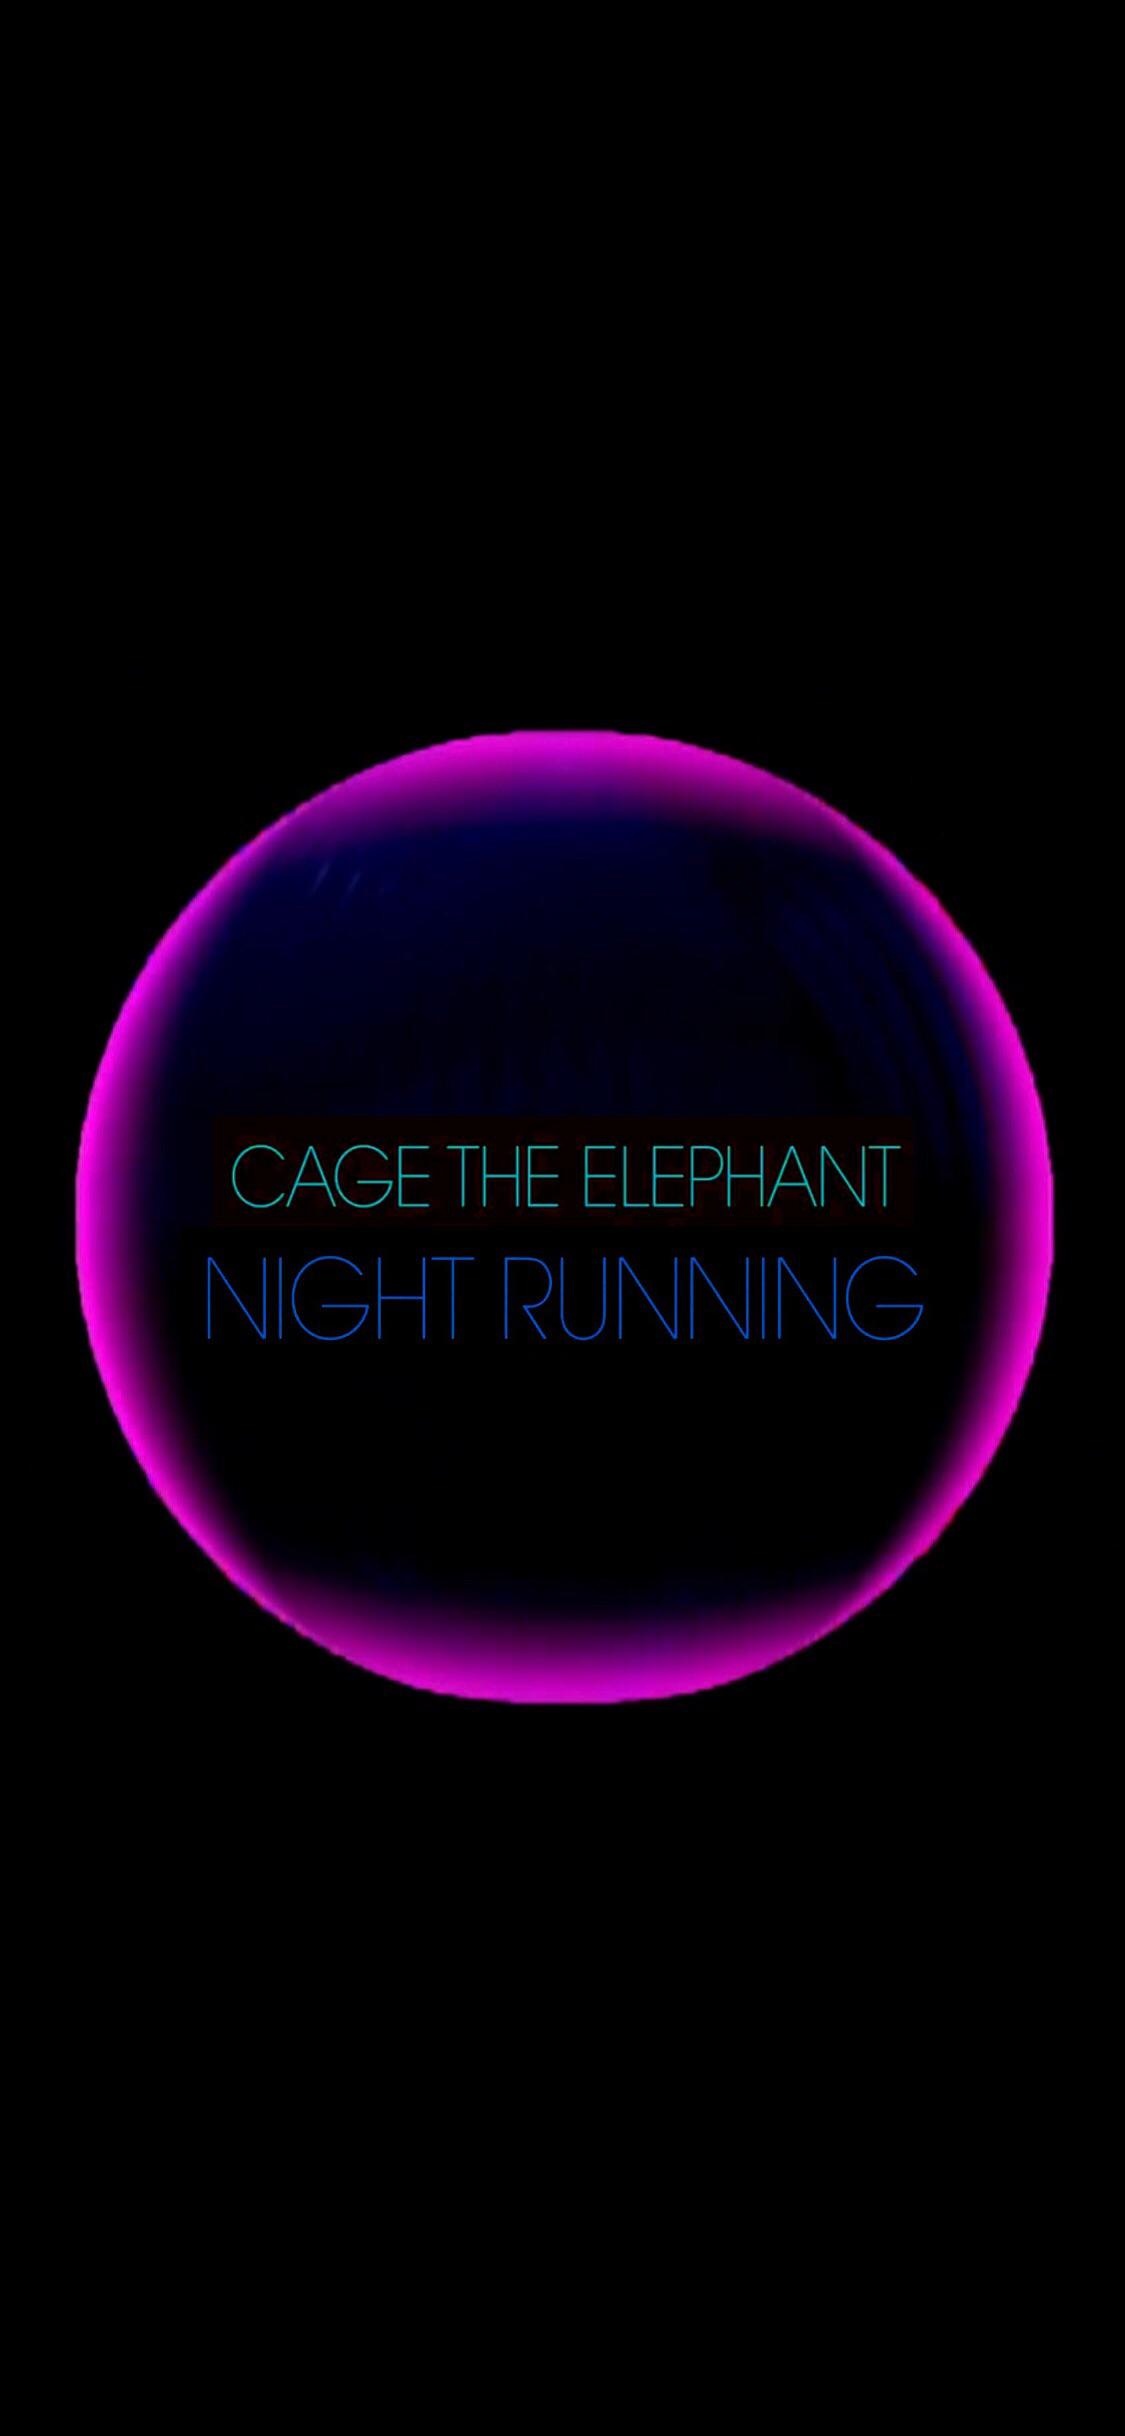 Cage The Elephant, Band members, Music performance, Colorful stage lights, 1130x2440 HD Phone